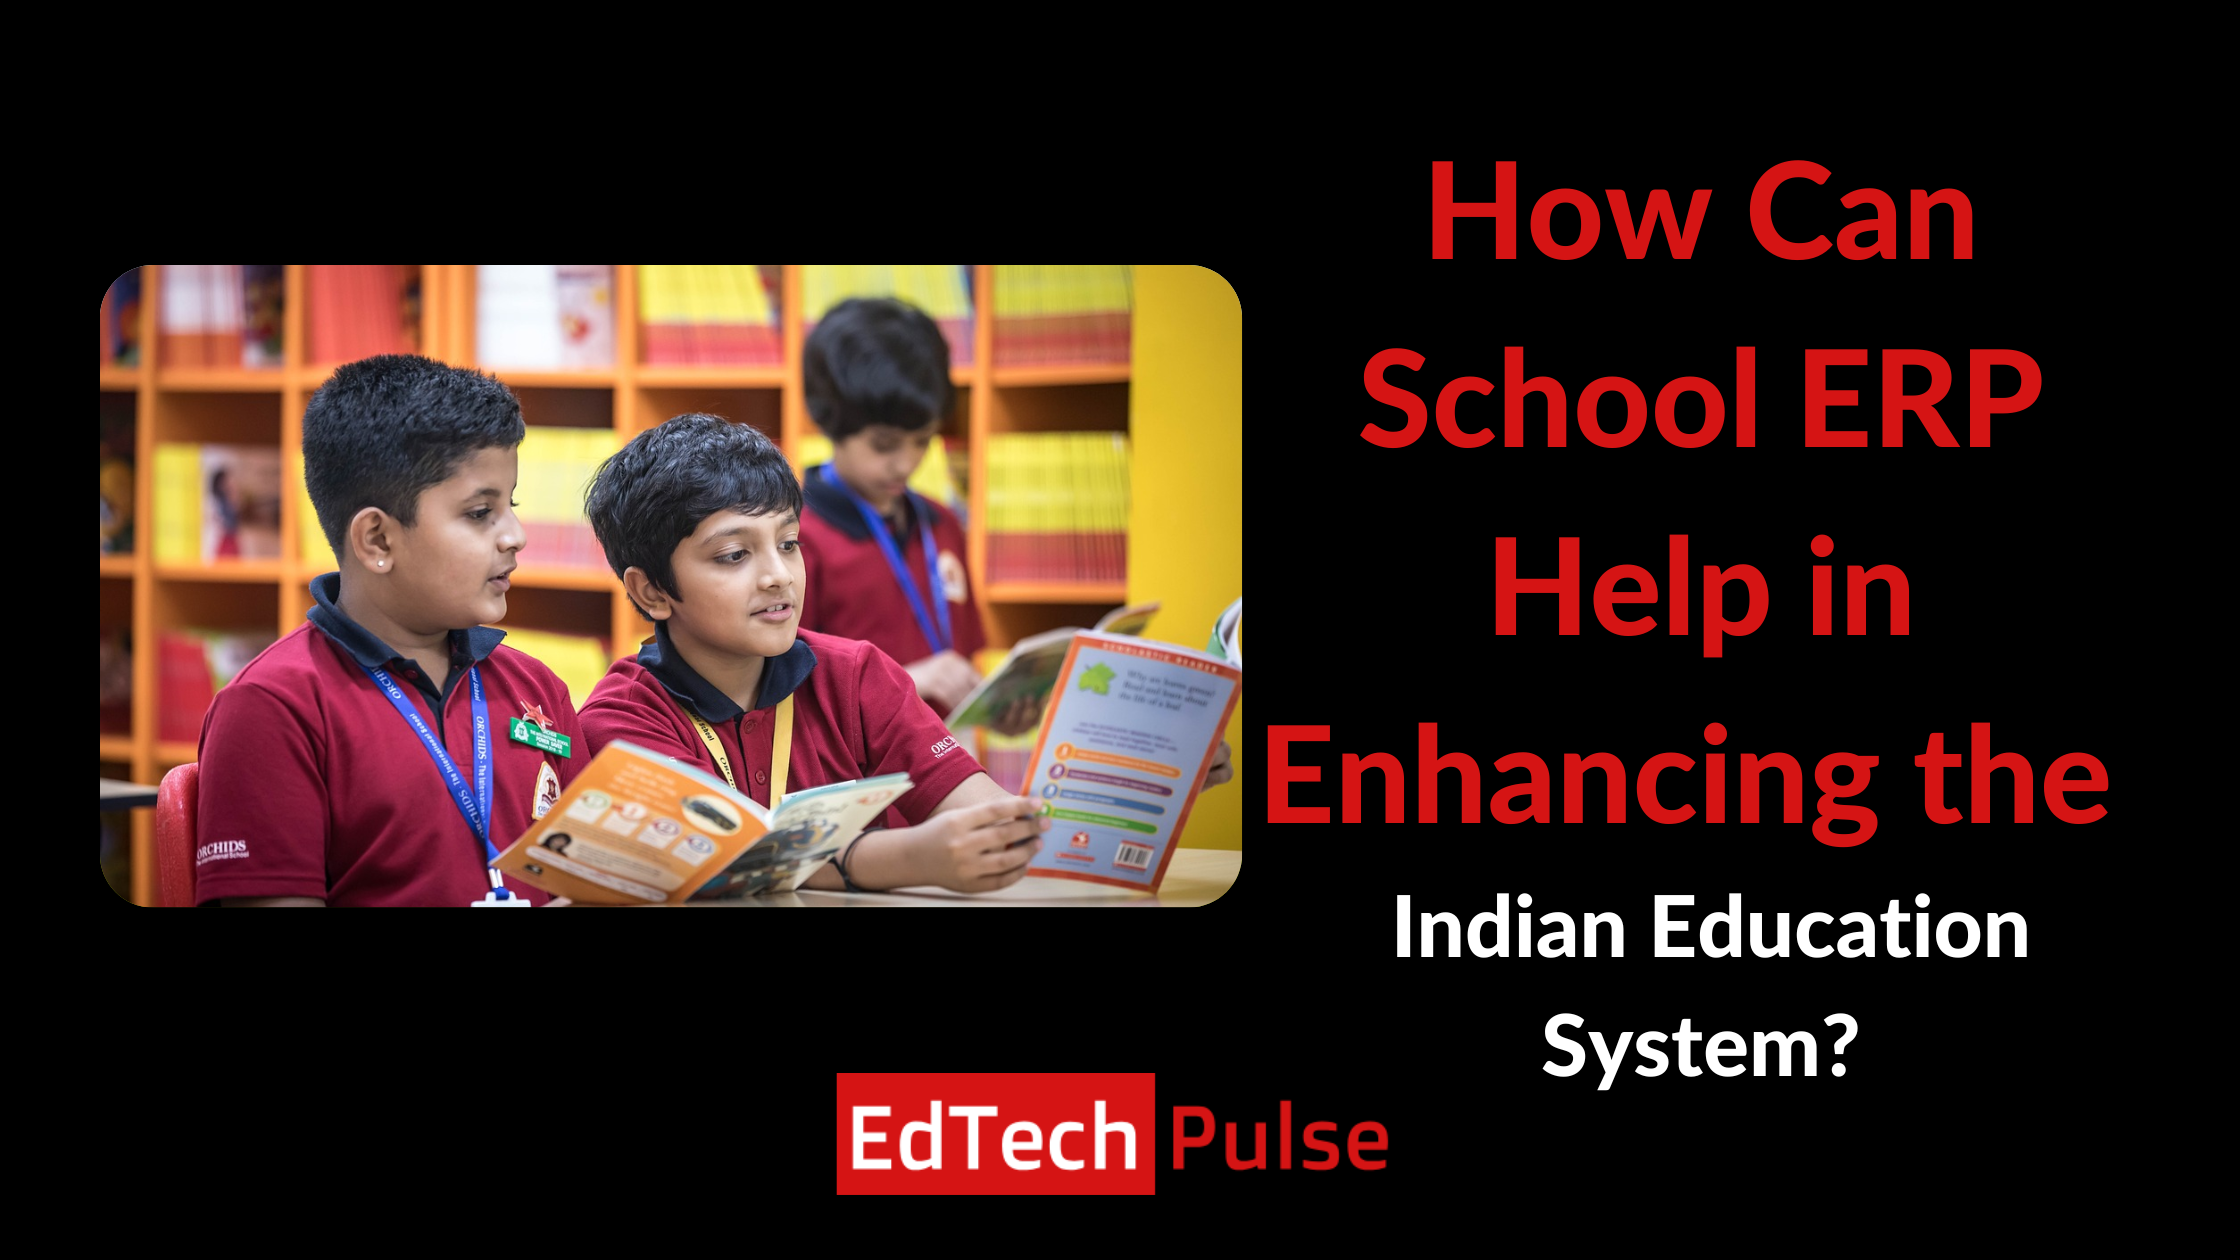 How Can School ERP Help in Enhancing the Indian Education System?